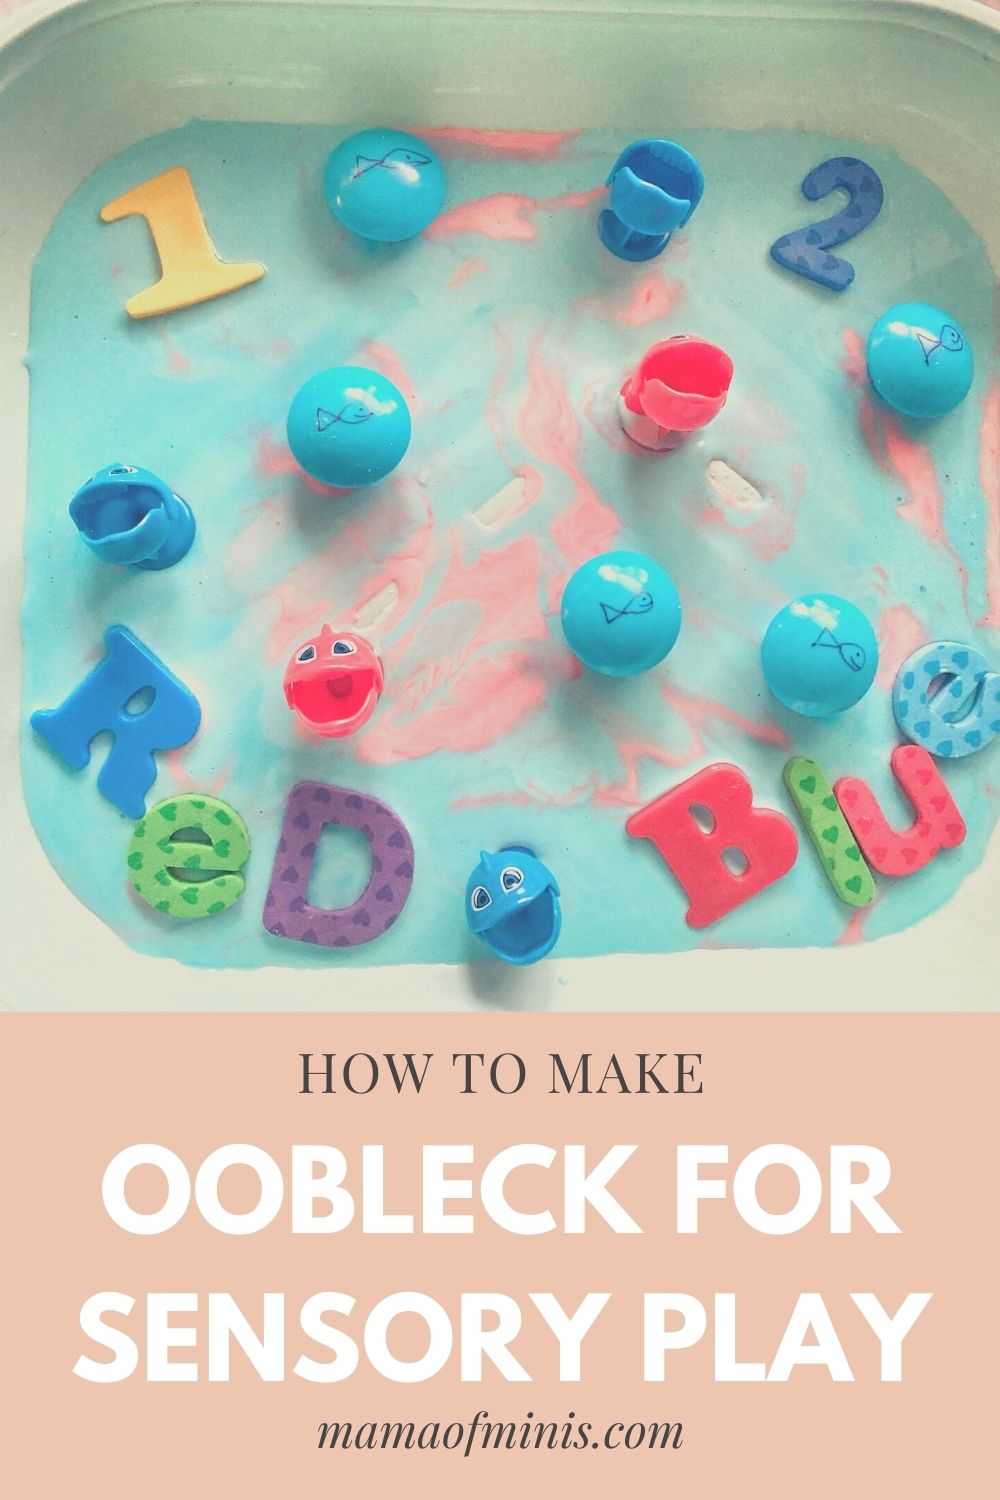 How to Make Oobleck for Sensory Play Pin